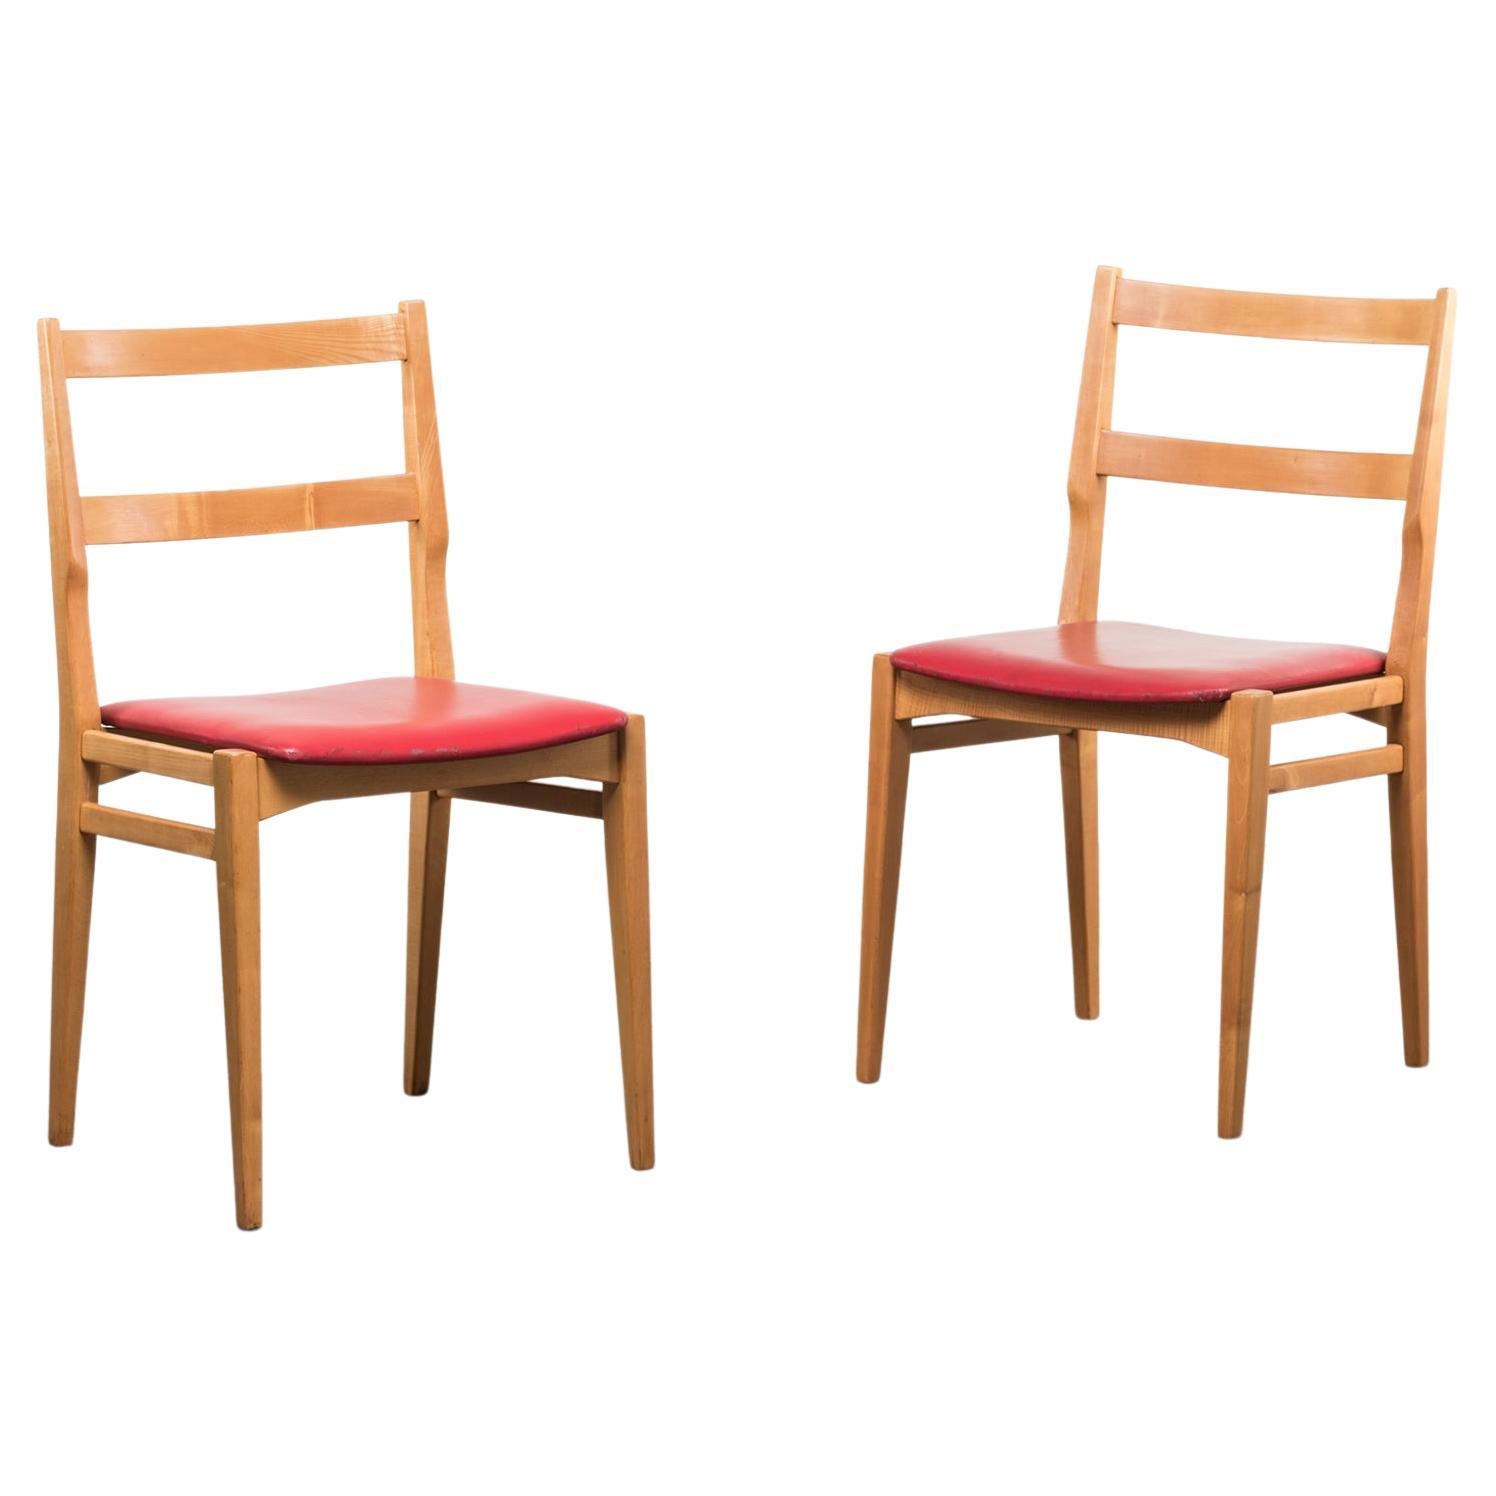 Chairs by Melchiorre Bega